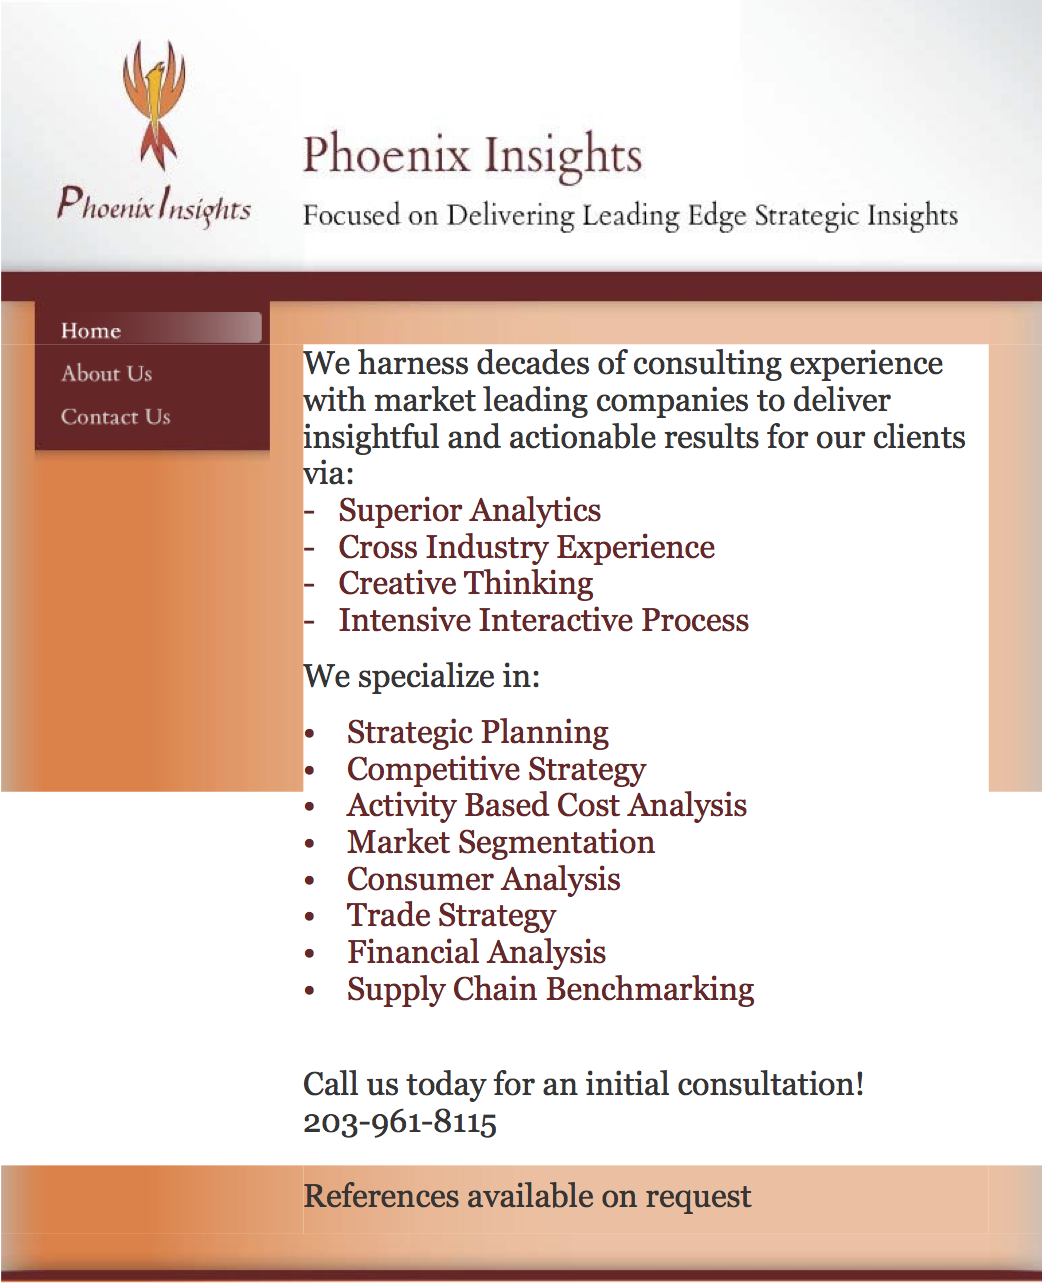 Phoenix Insights old home page